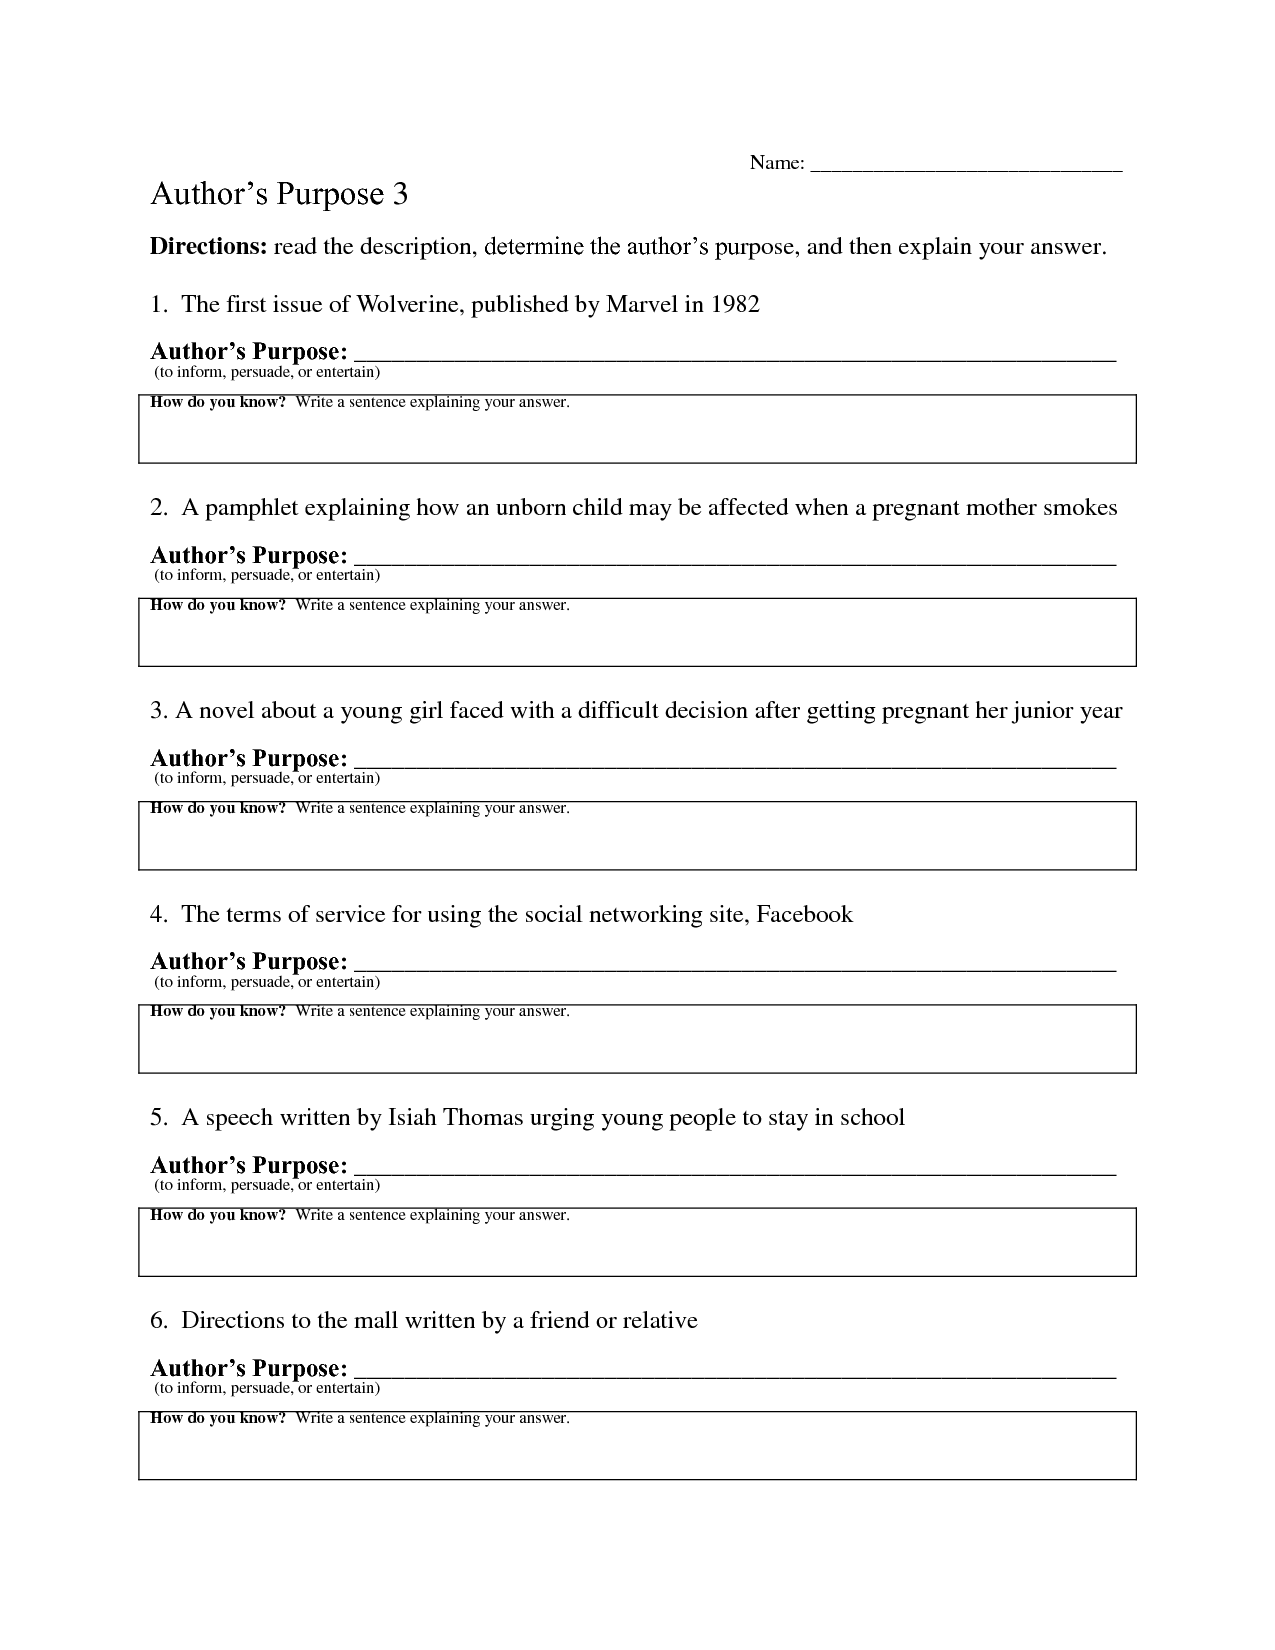 13-best-images-of-authors-purpose-practice-worksheets-author-s